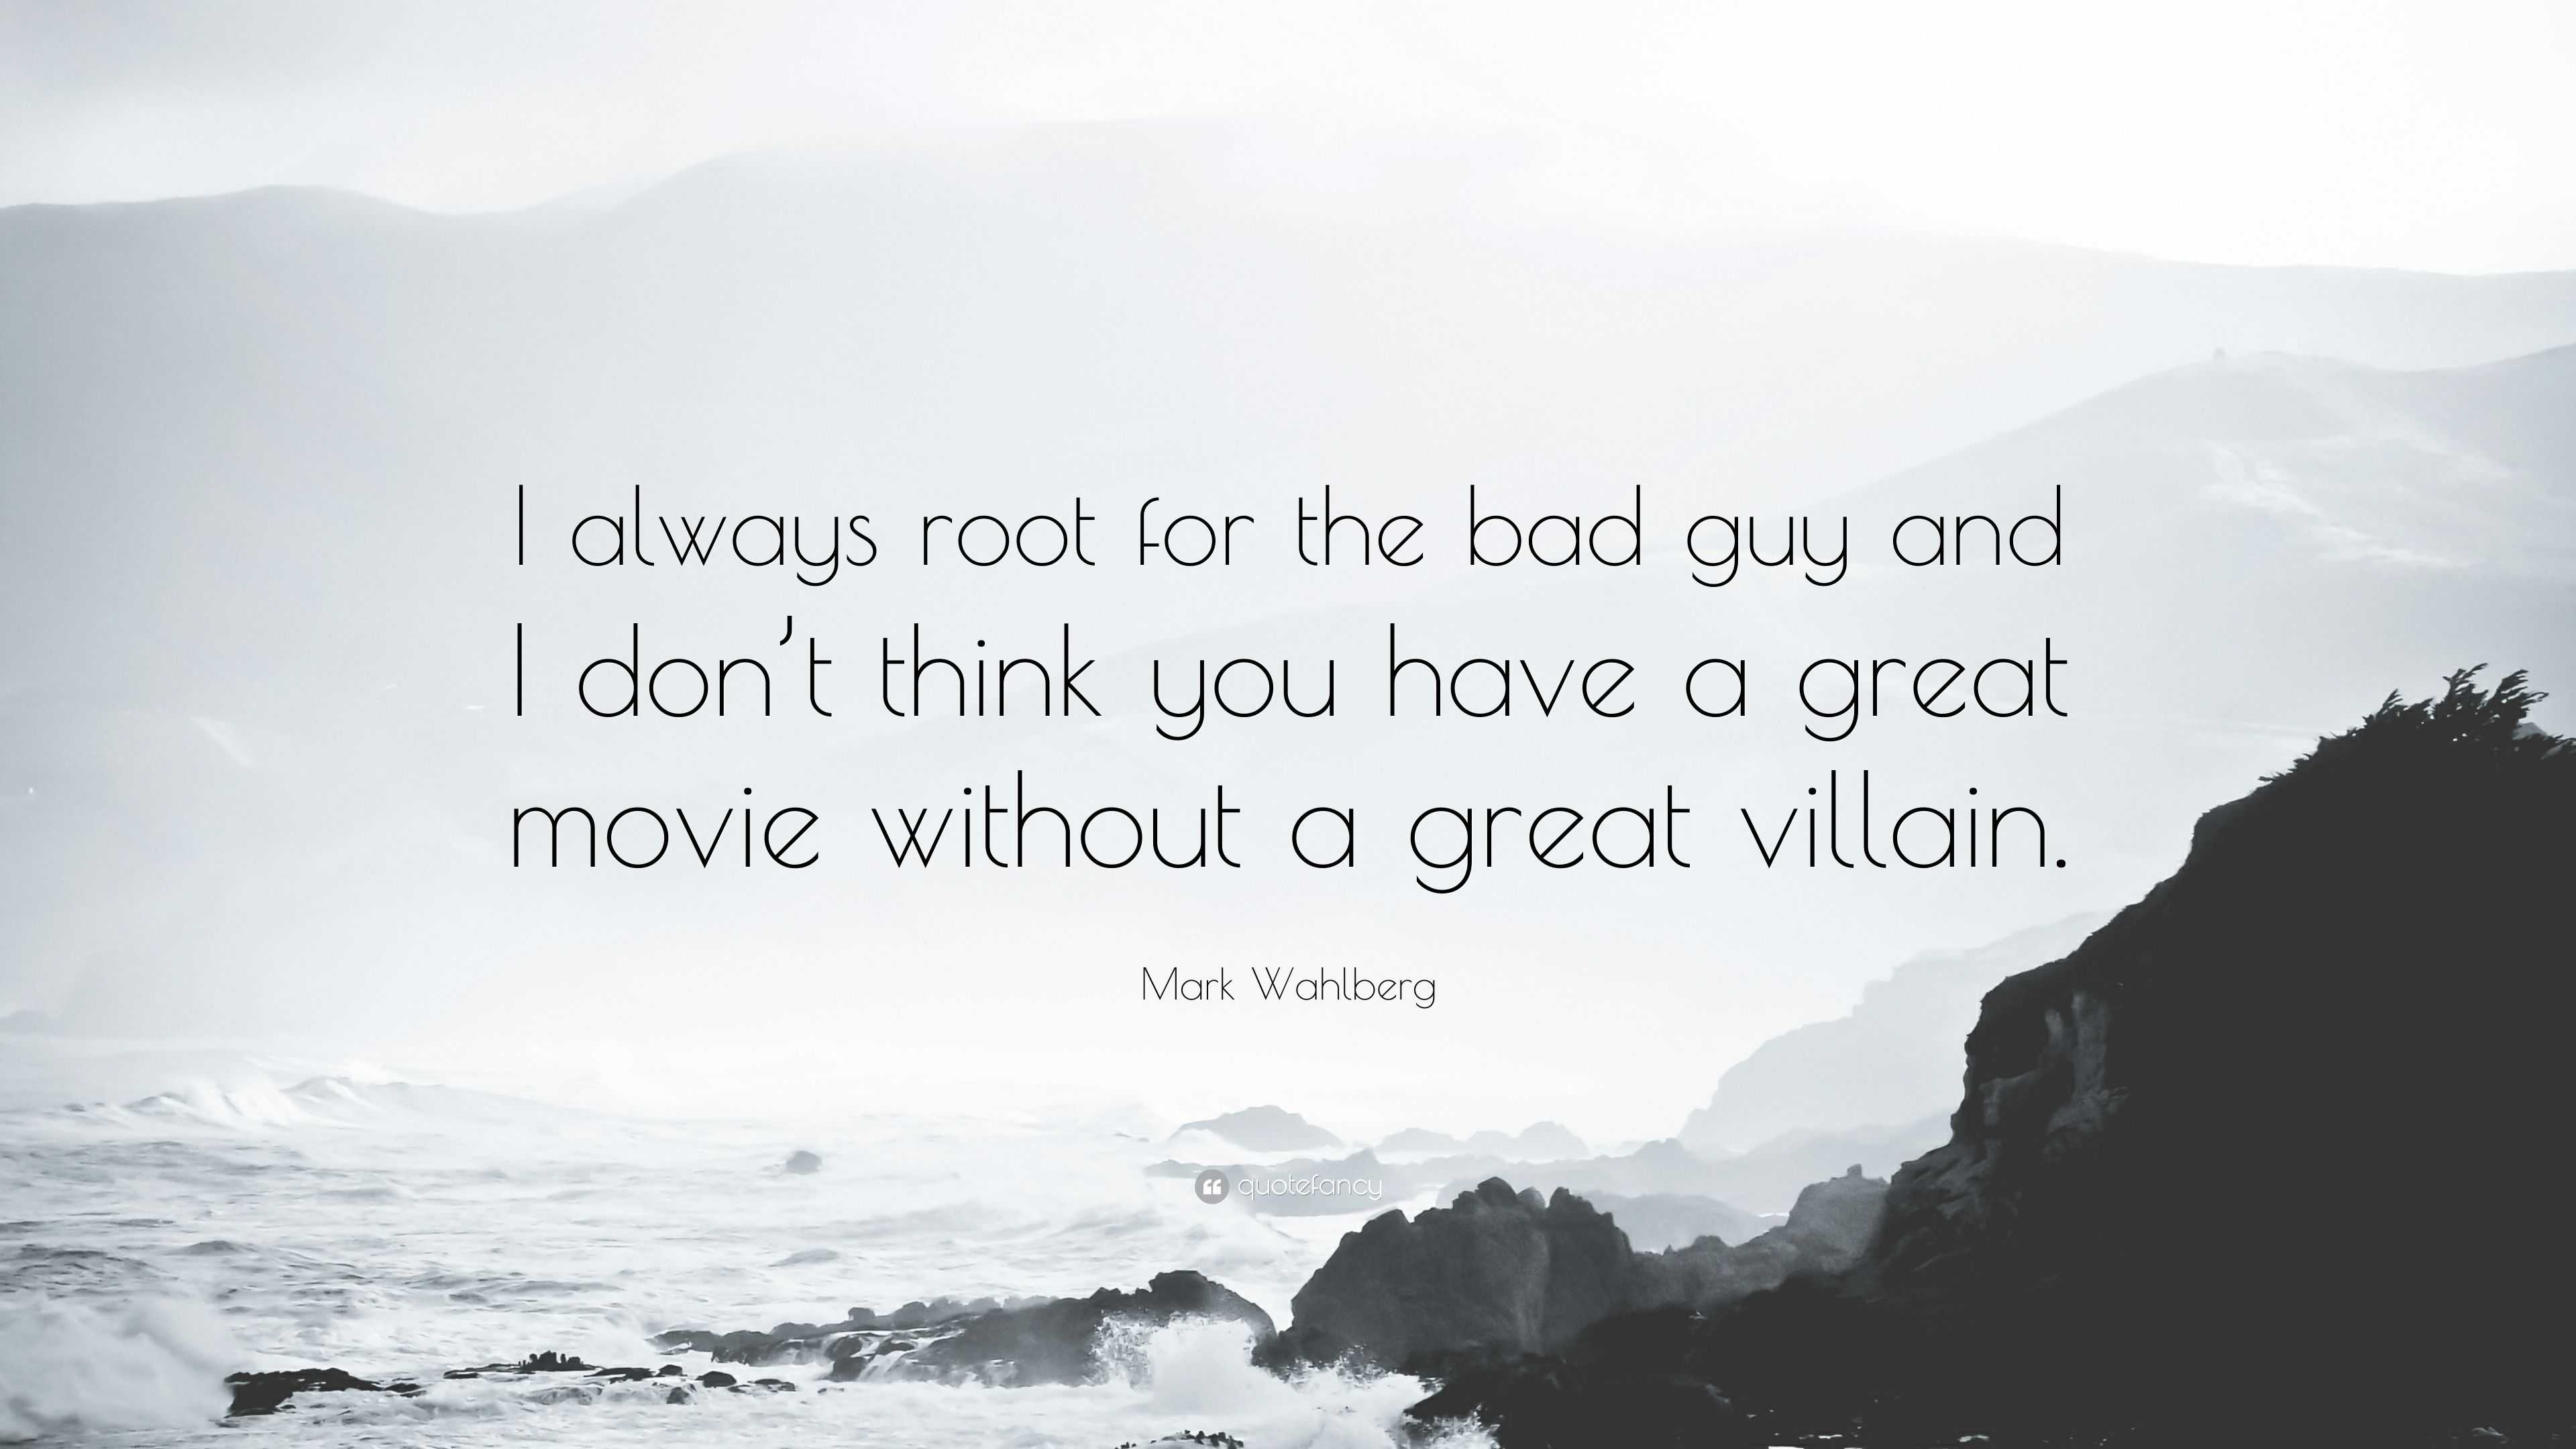 Mark Wahlberg Quote: “I Always Root For The Bad Guy And I Don't Think You